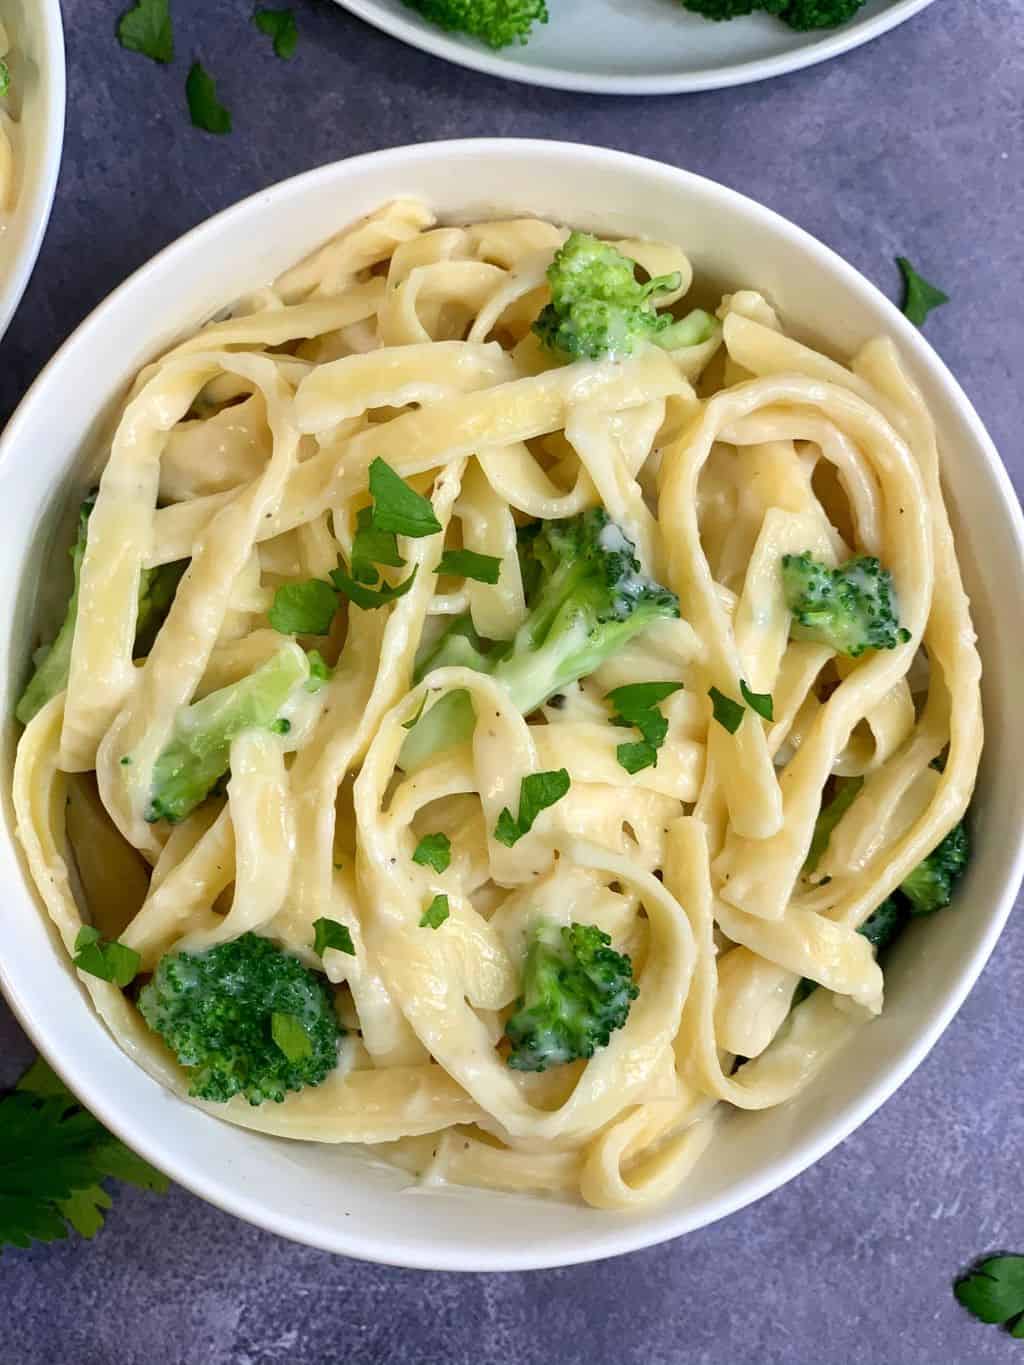 Fettucchini Alfredo served in a bowl garnished with steamed broccoli and parsley